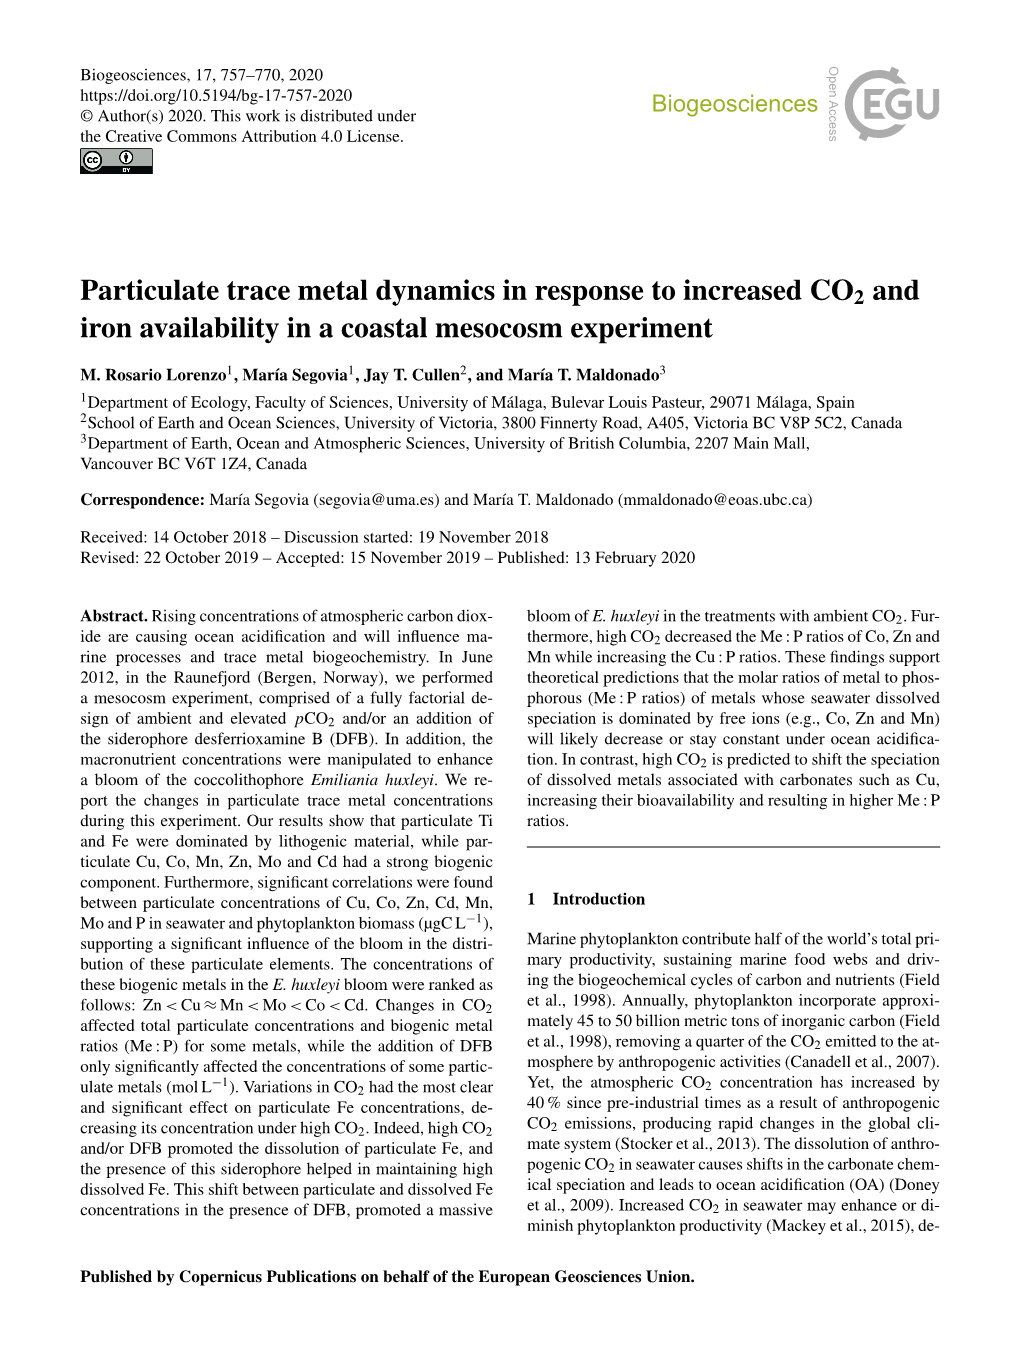 Particulate Trace Metal Dynamics in Response to Increased CO2 and Iron Availability in a Coastal Mesocosm Experiment